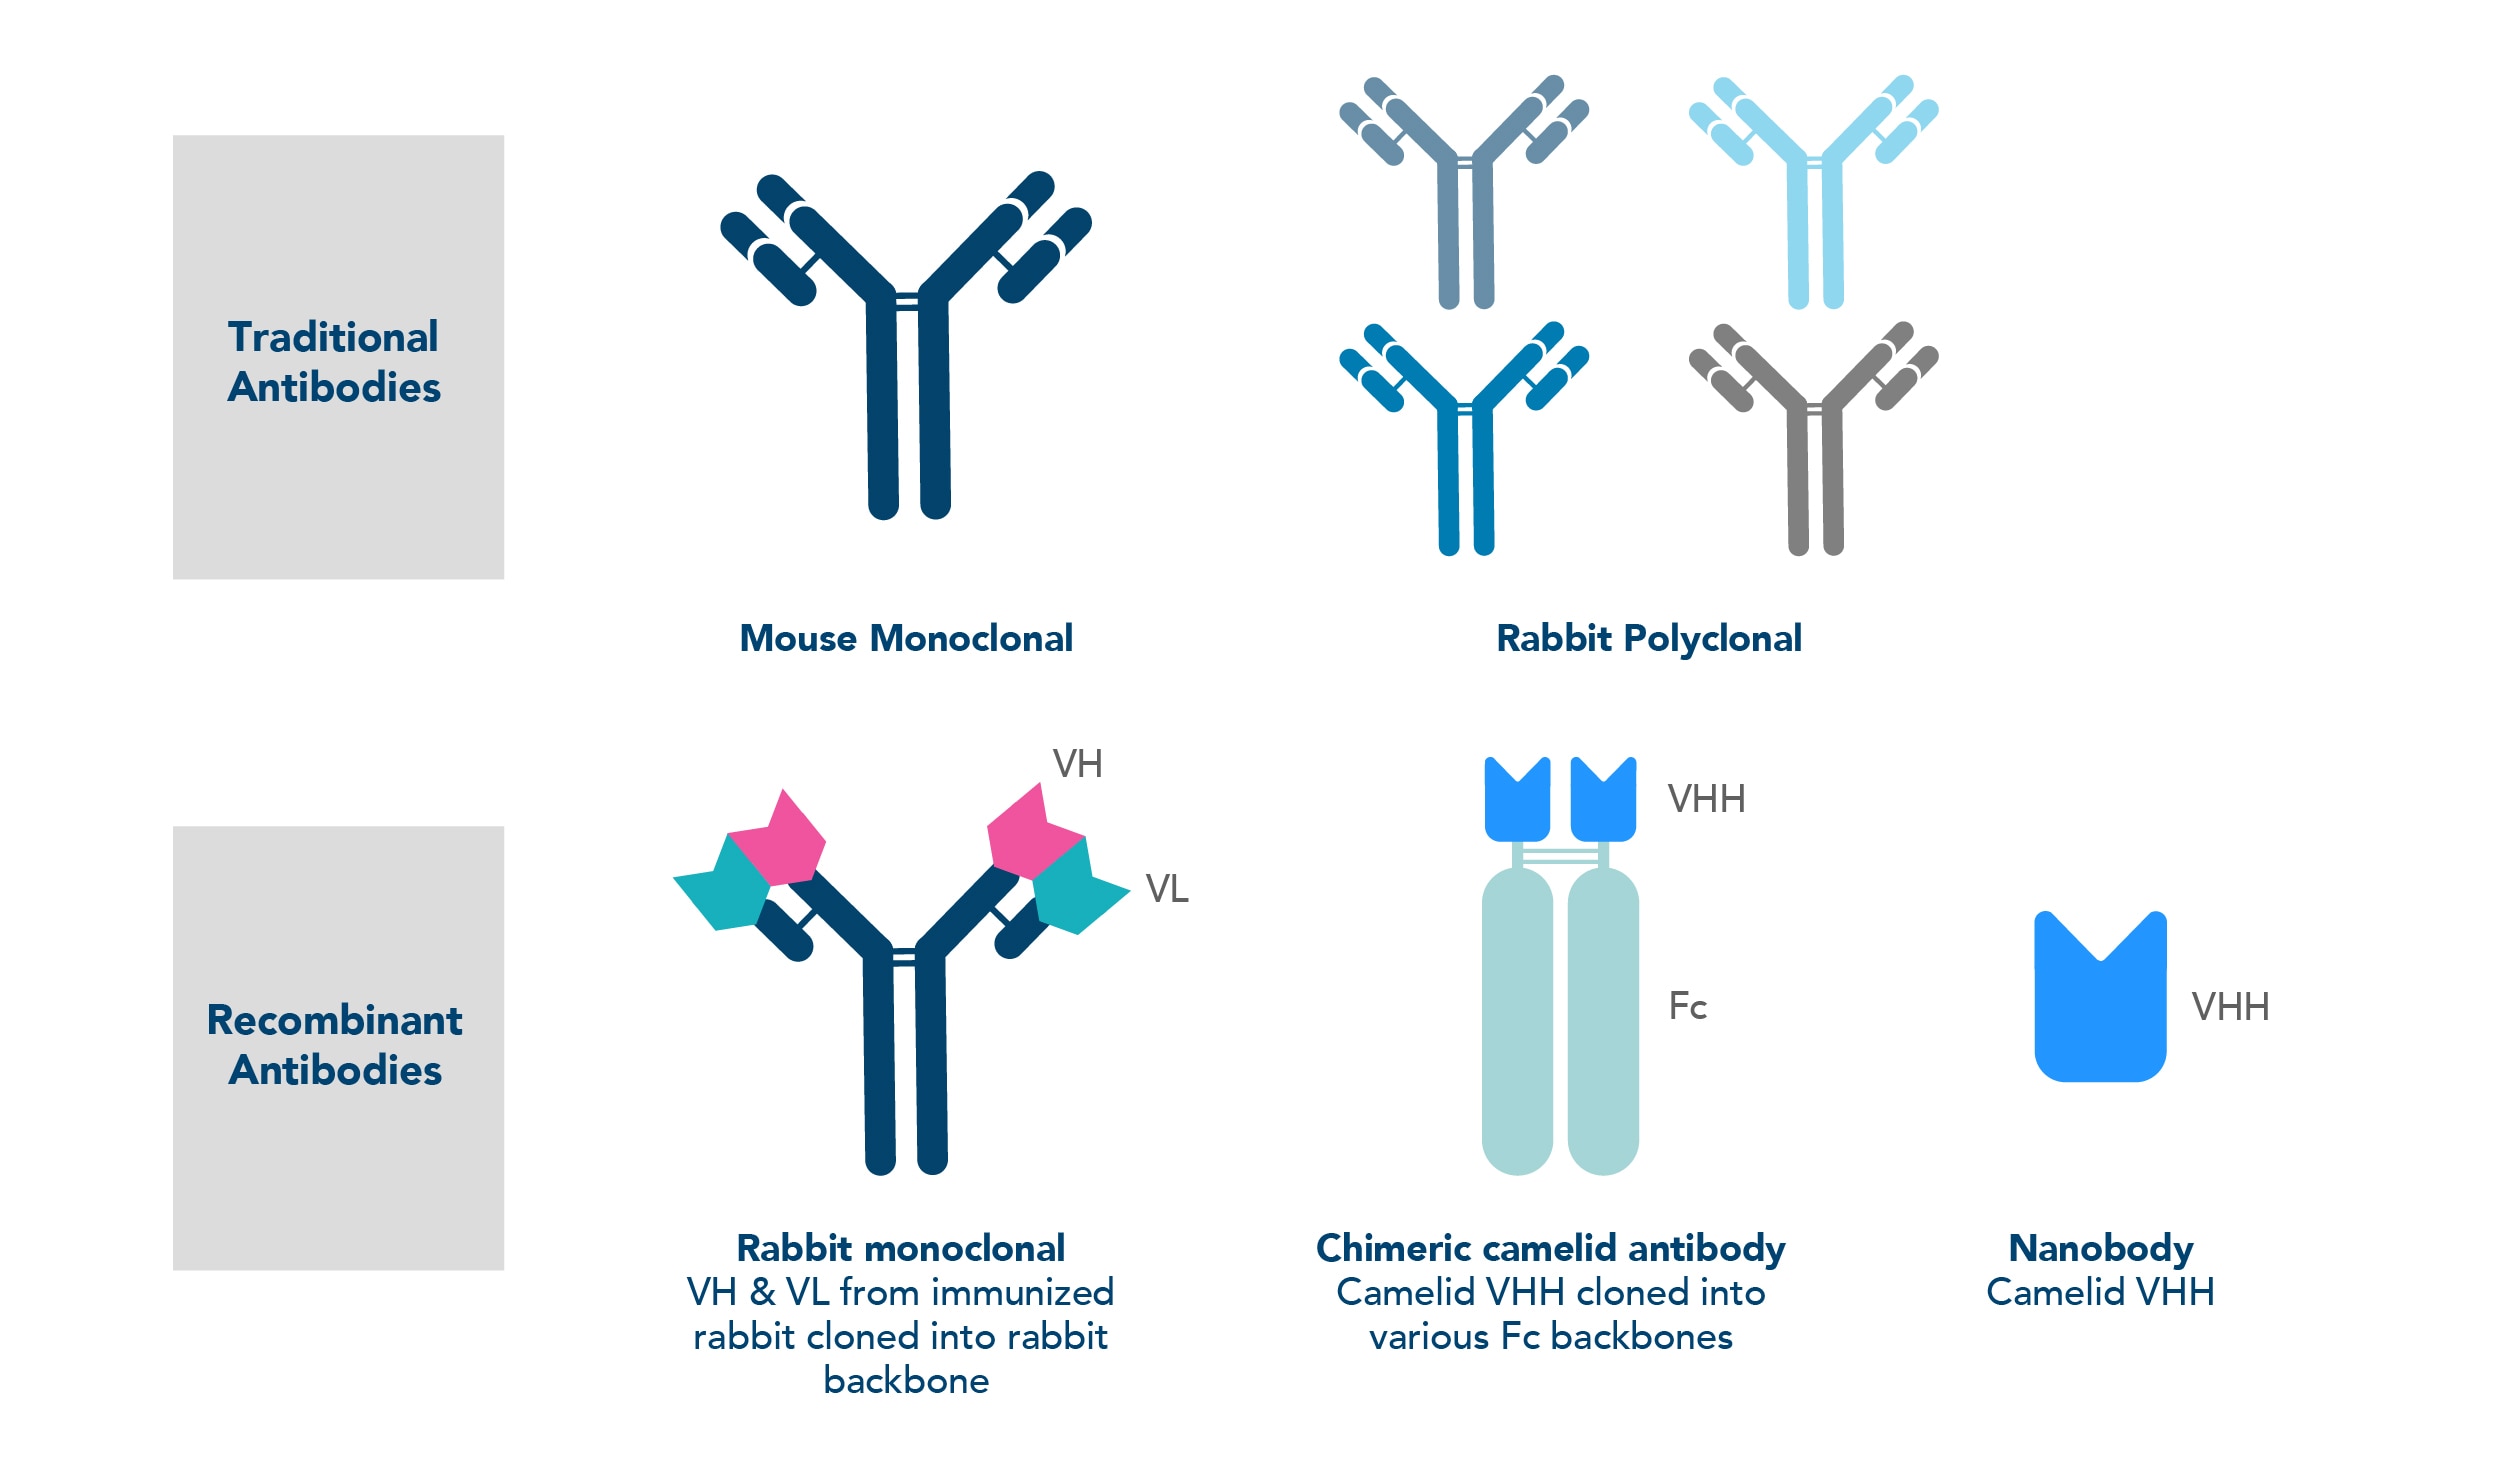 Comparison between traditional antibodies and recombinant antibodies